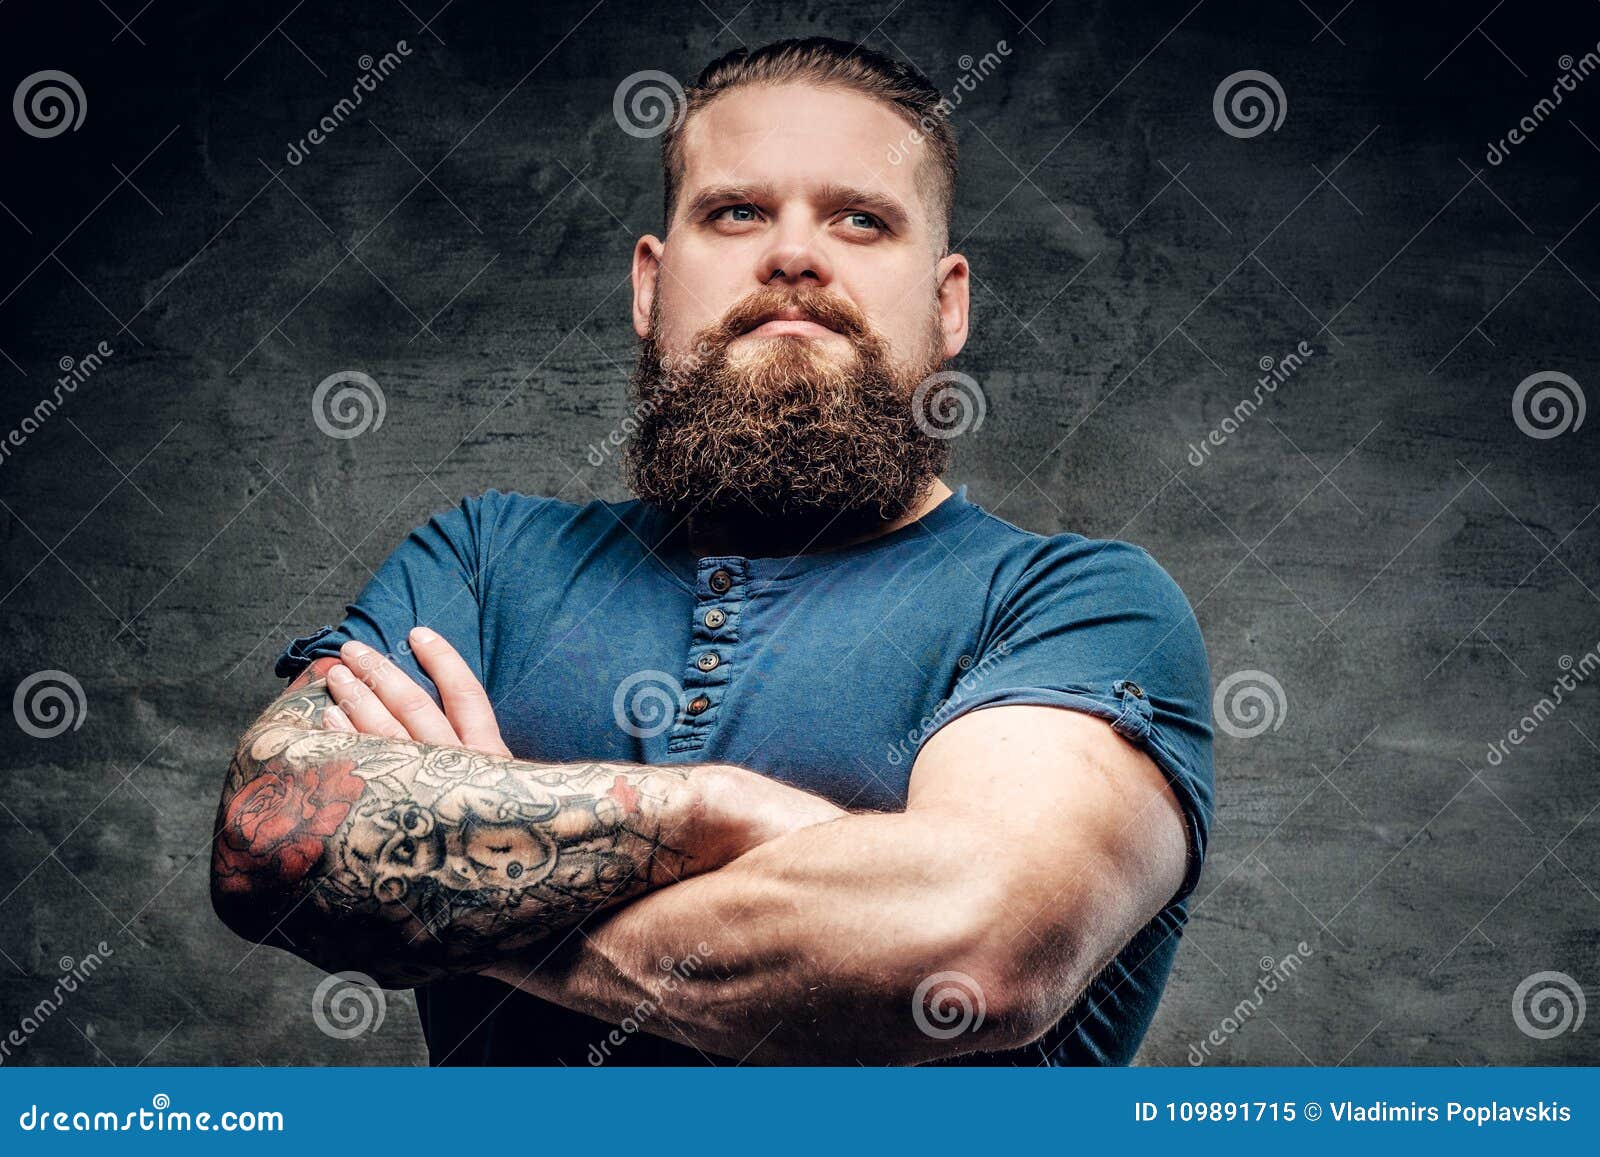 Bearded Fat Male with Tattoo on Arms. Stock Image - Image of